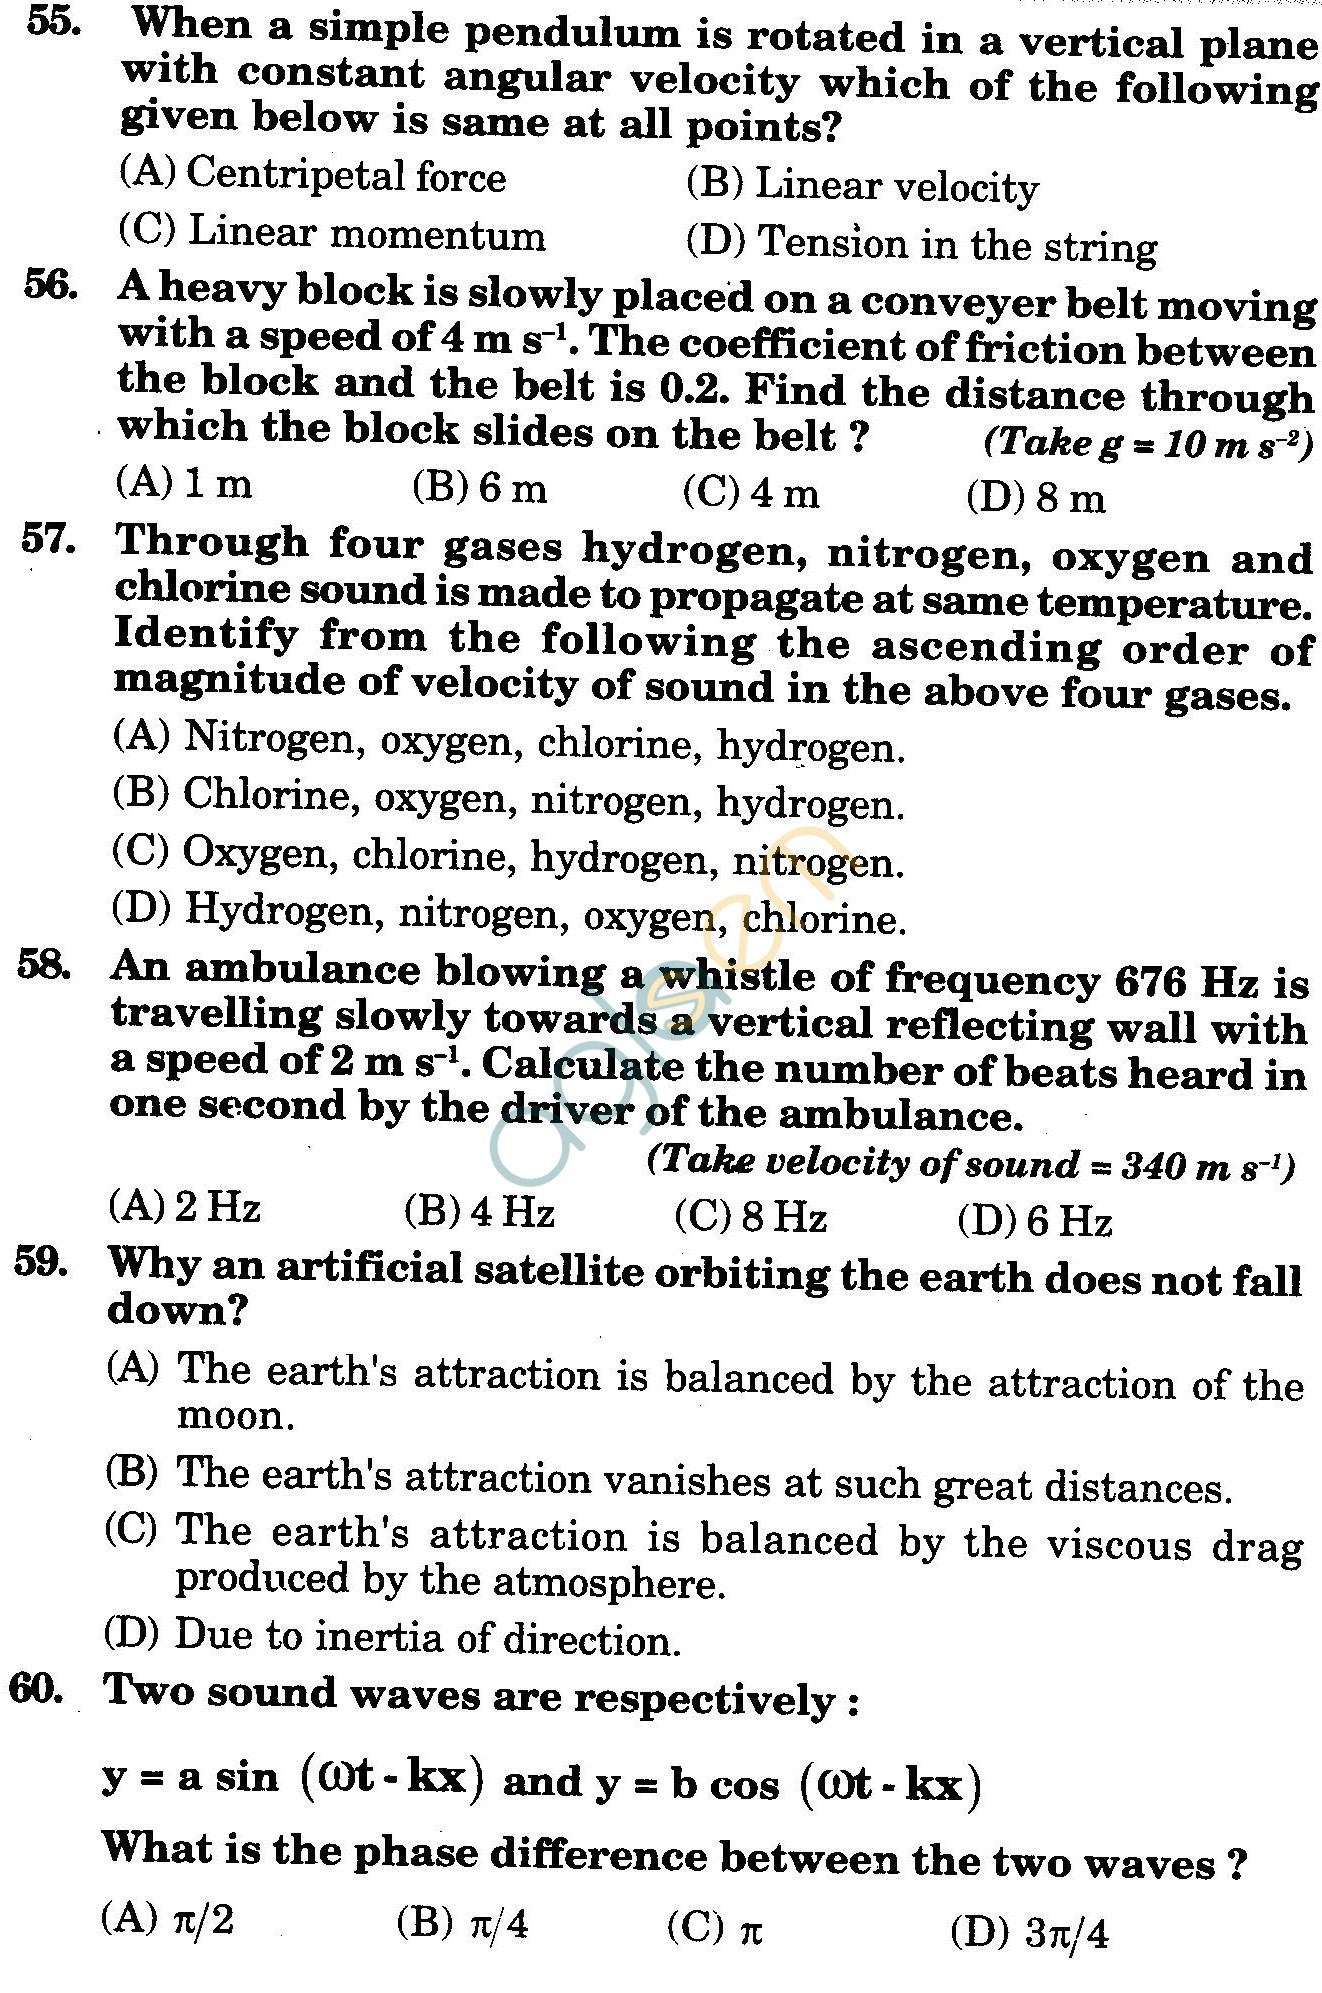 NSTSE 2010 Class XI PCM Question Paper with Answers - Physics